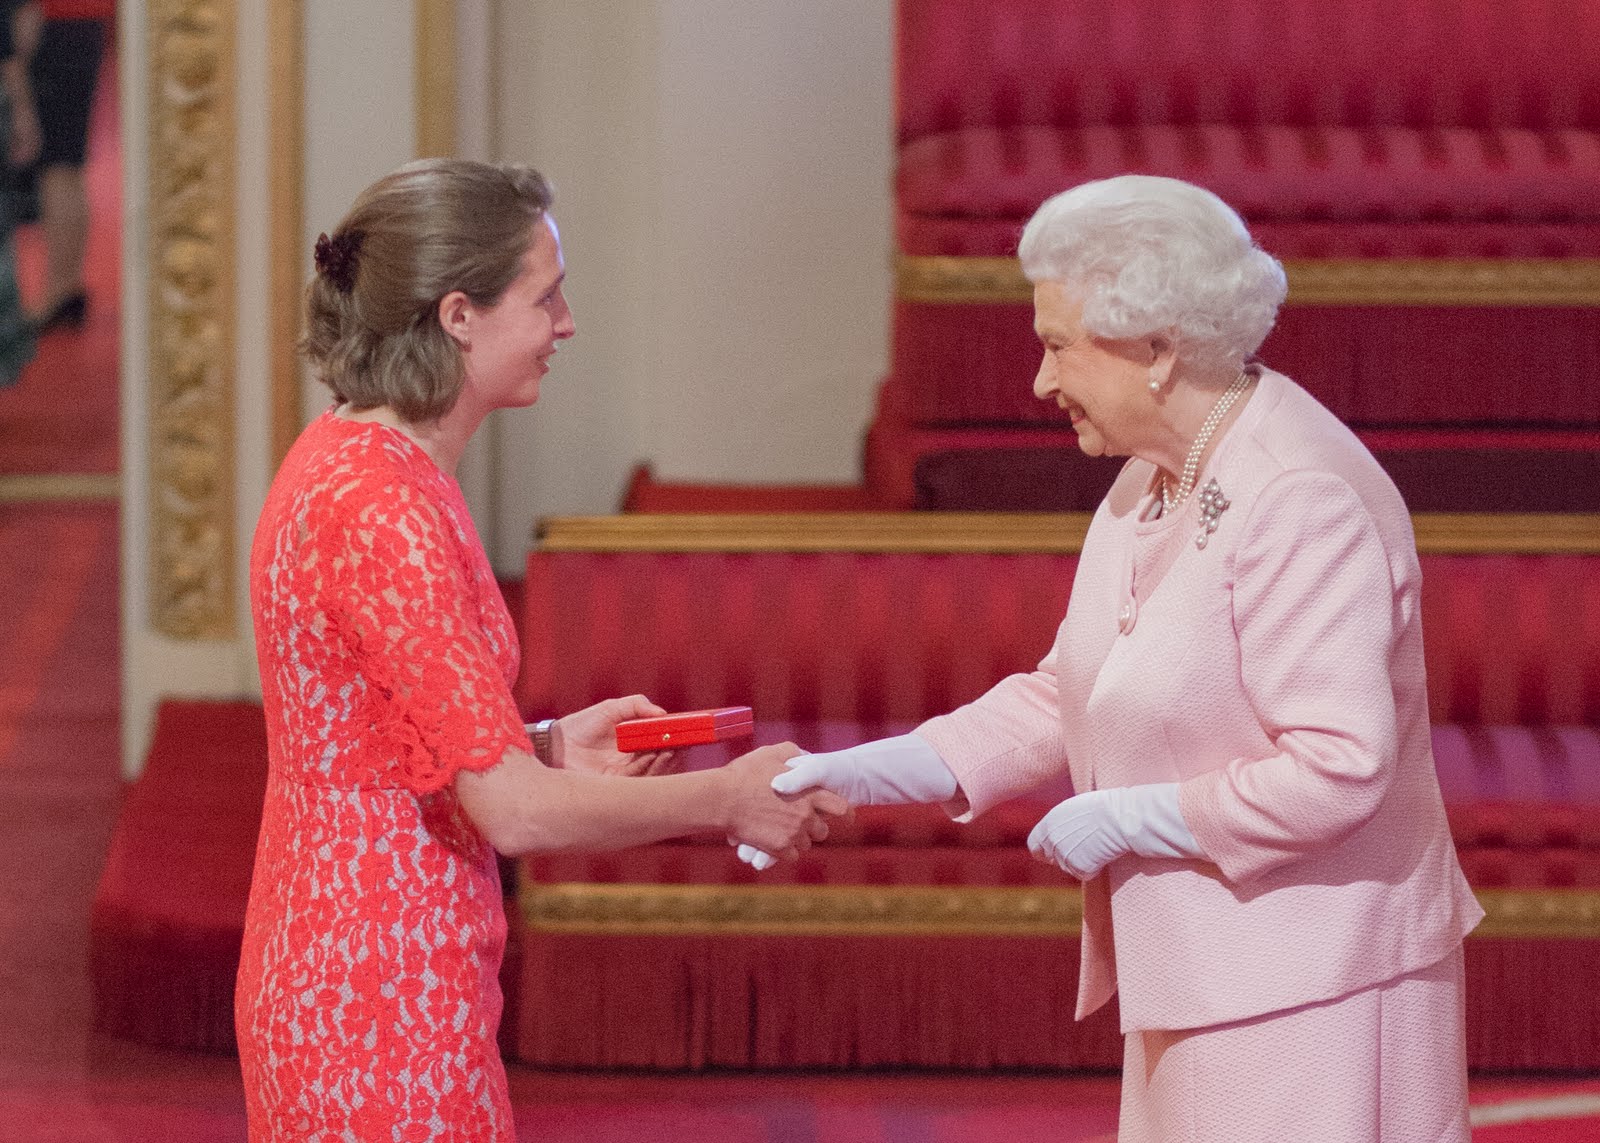 Nicola Byrom 2015 Queen's Young Leader from the United Kingdom